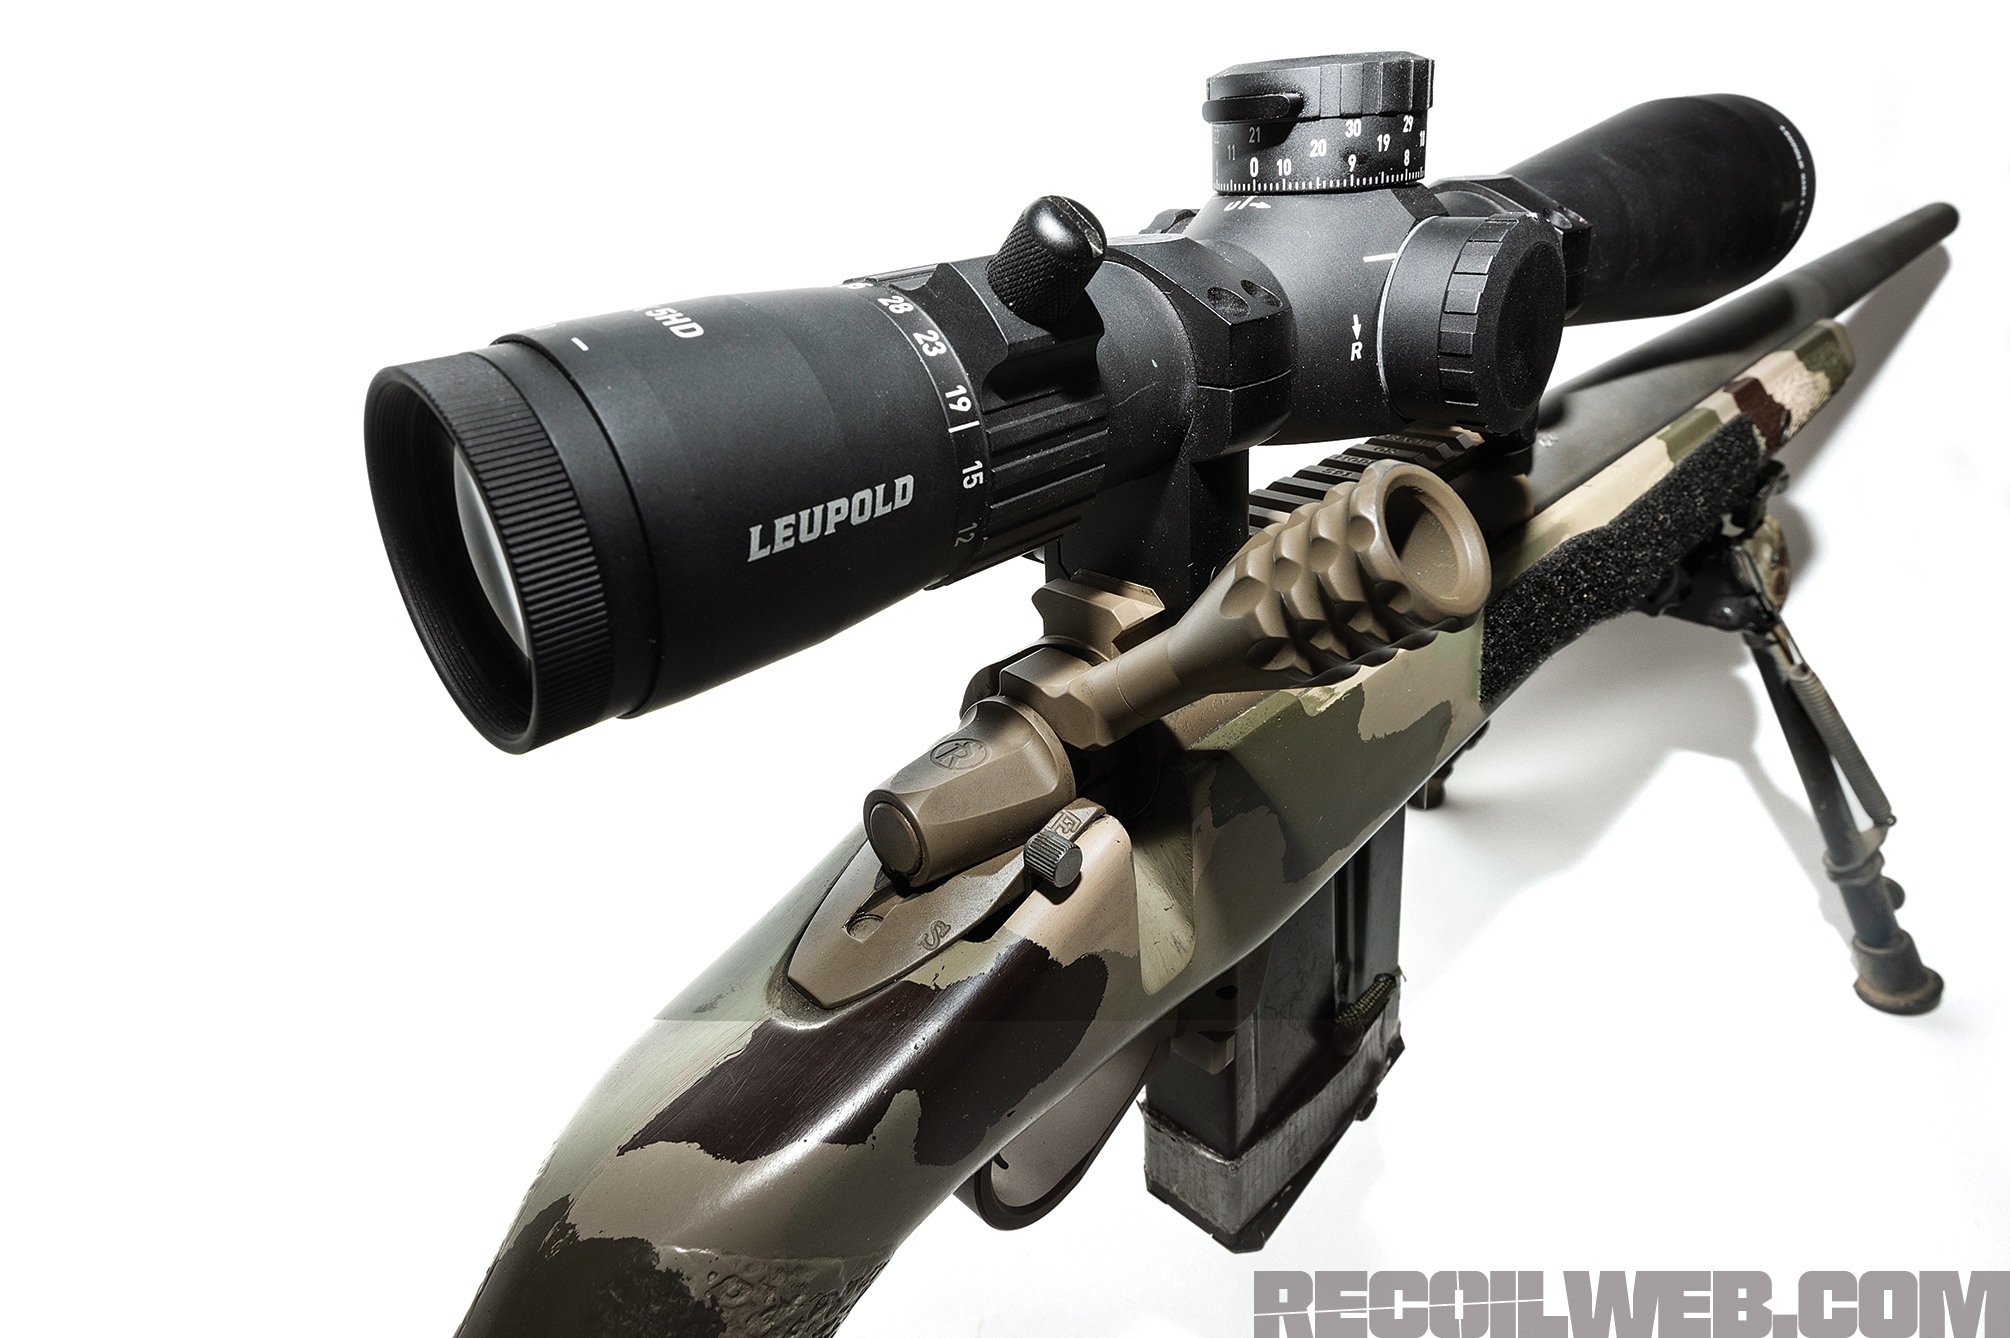 Keeping Up with Precision: The Leupold Mark 5HD 7-35x56 Scope | RECOIL